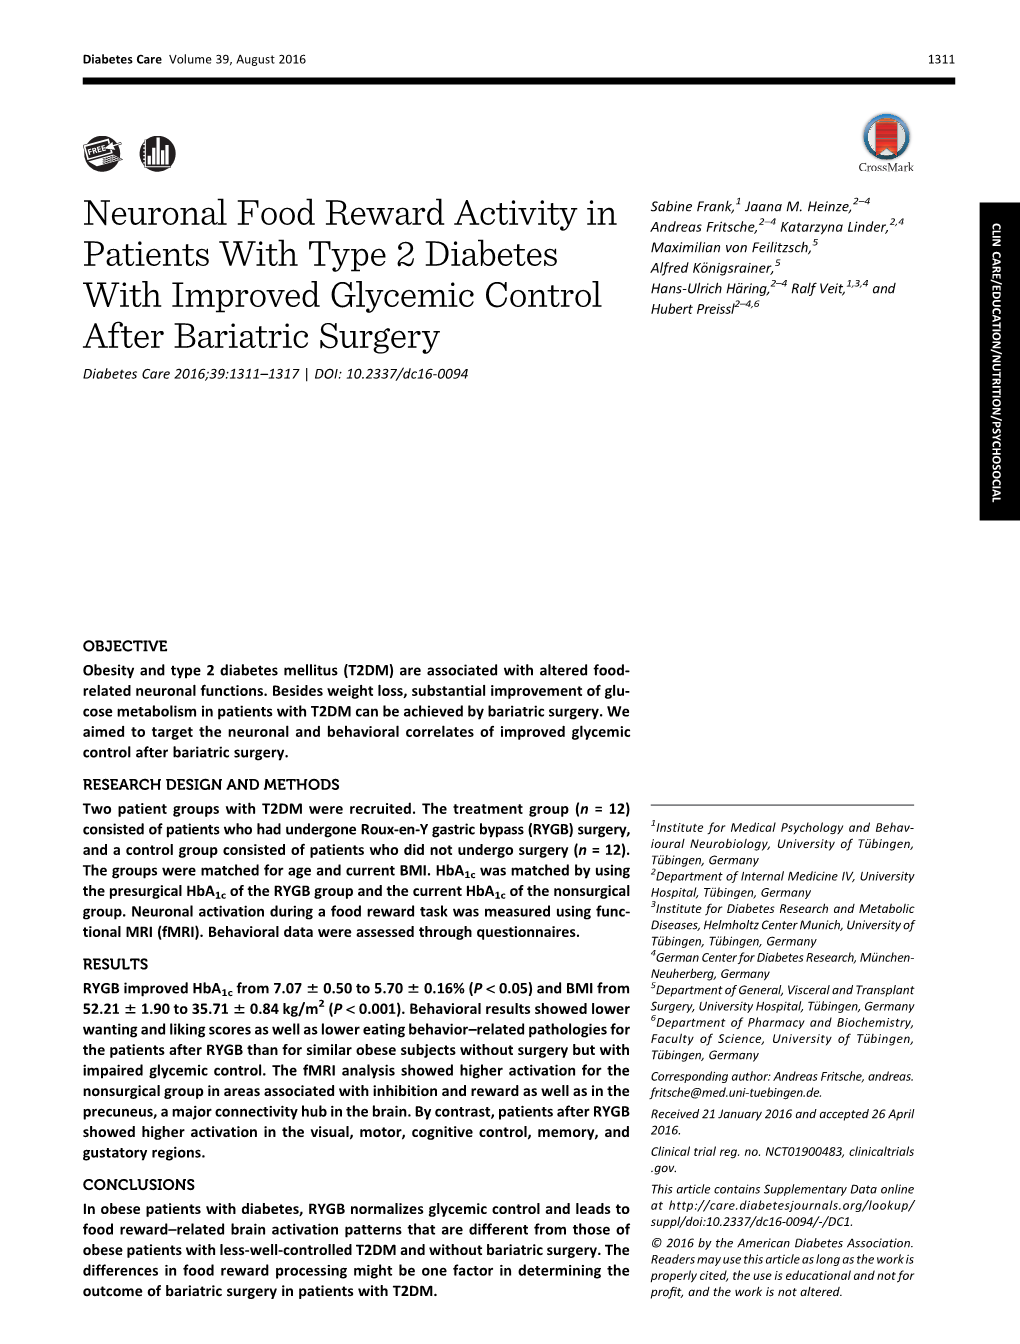 Neuronal Food Reward Activity in Patients with Type 2 Diabetes With